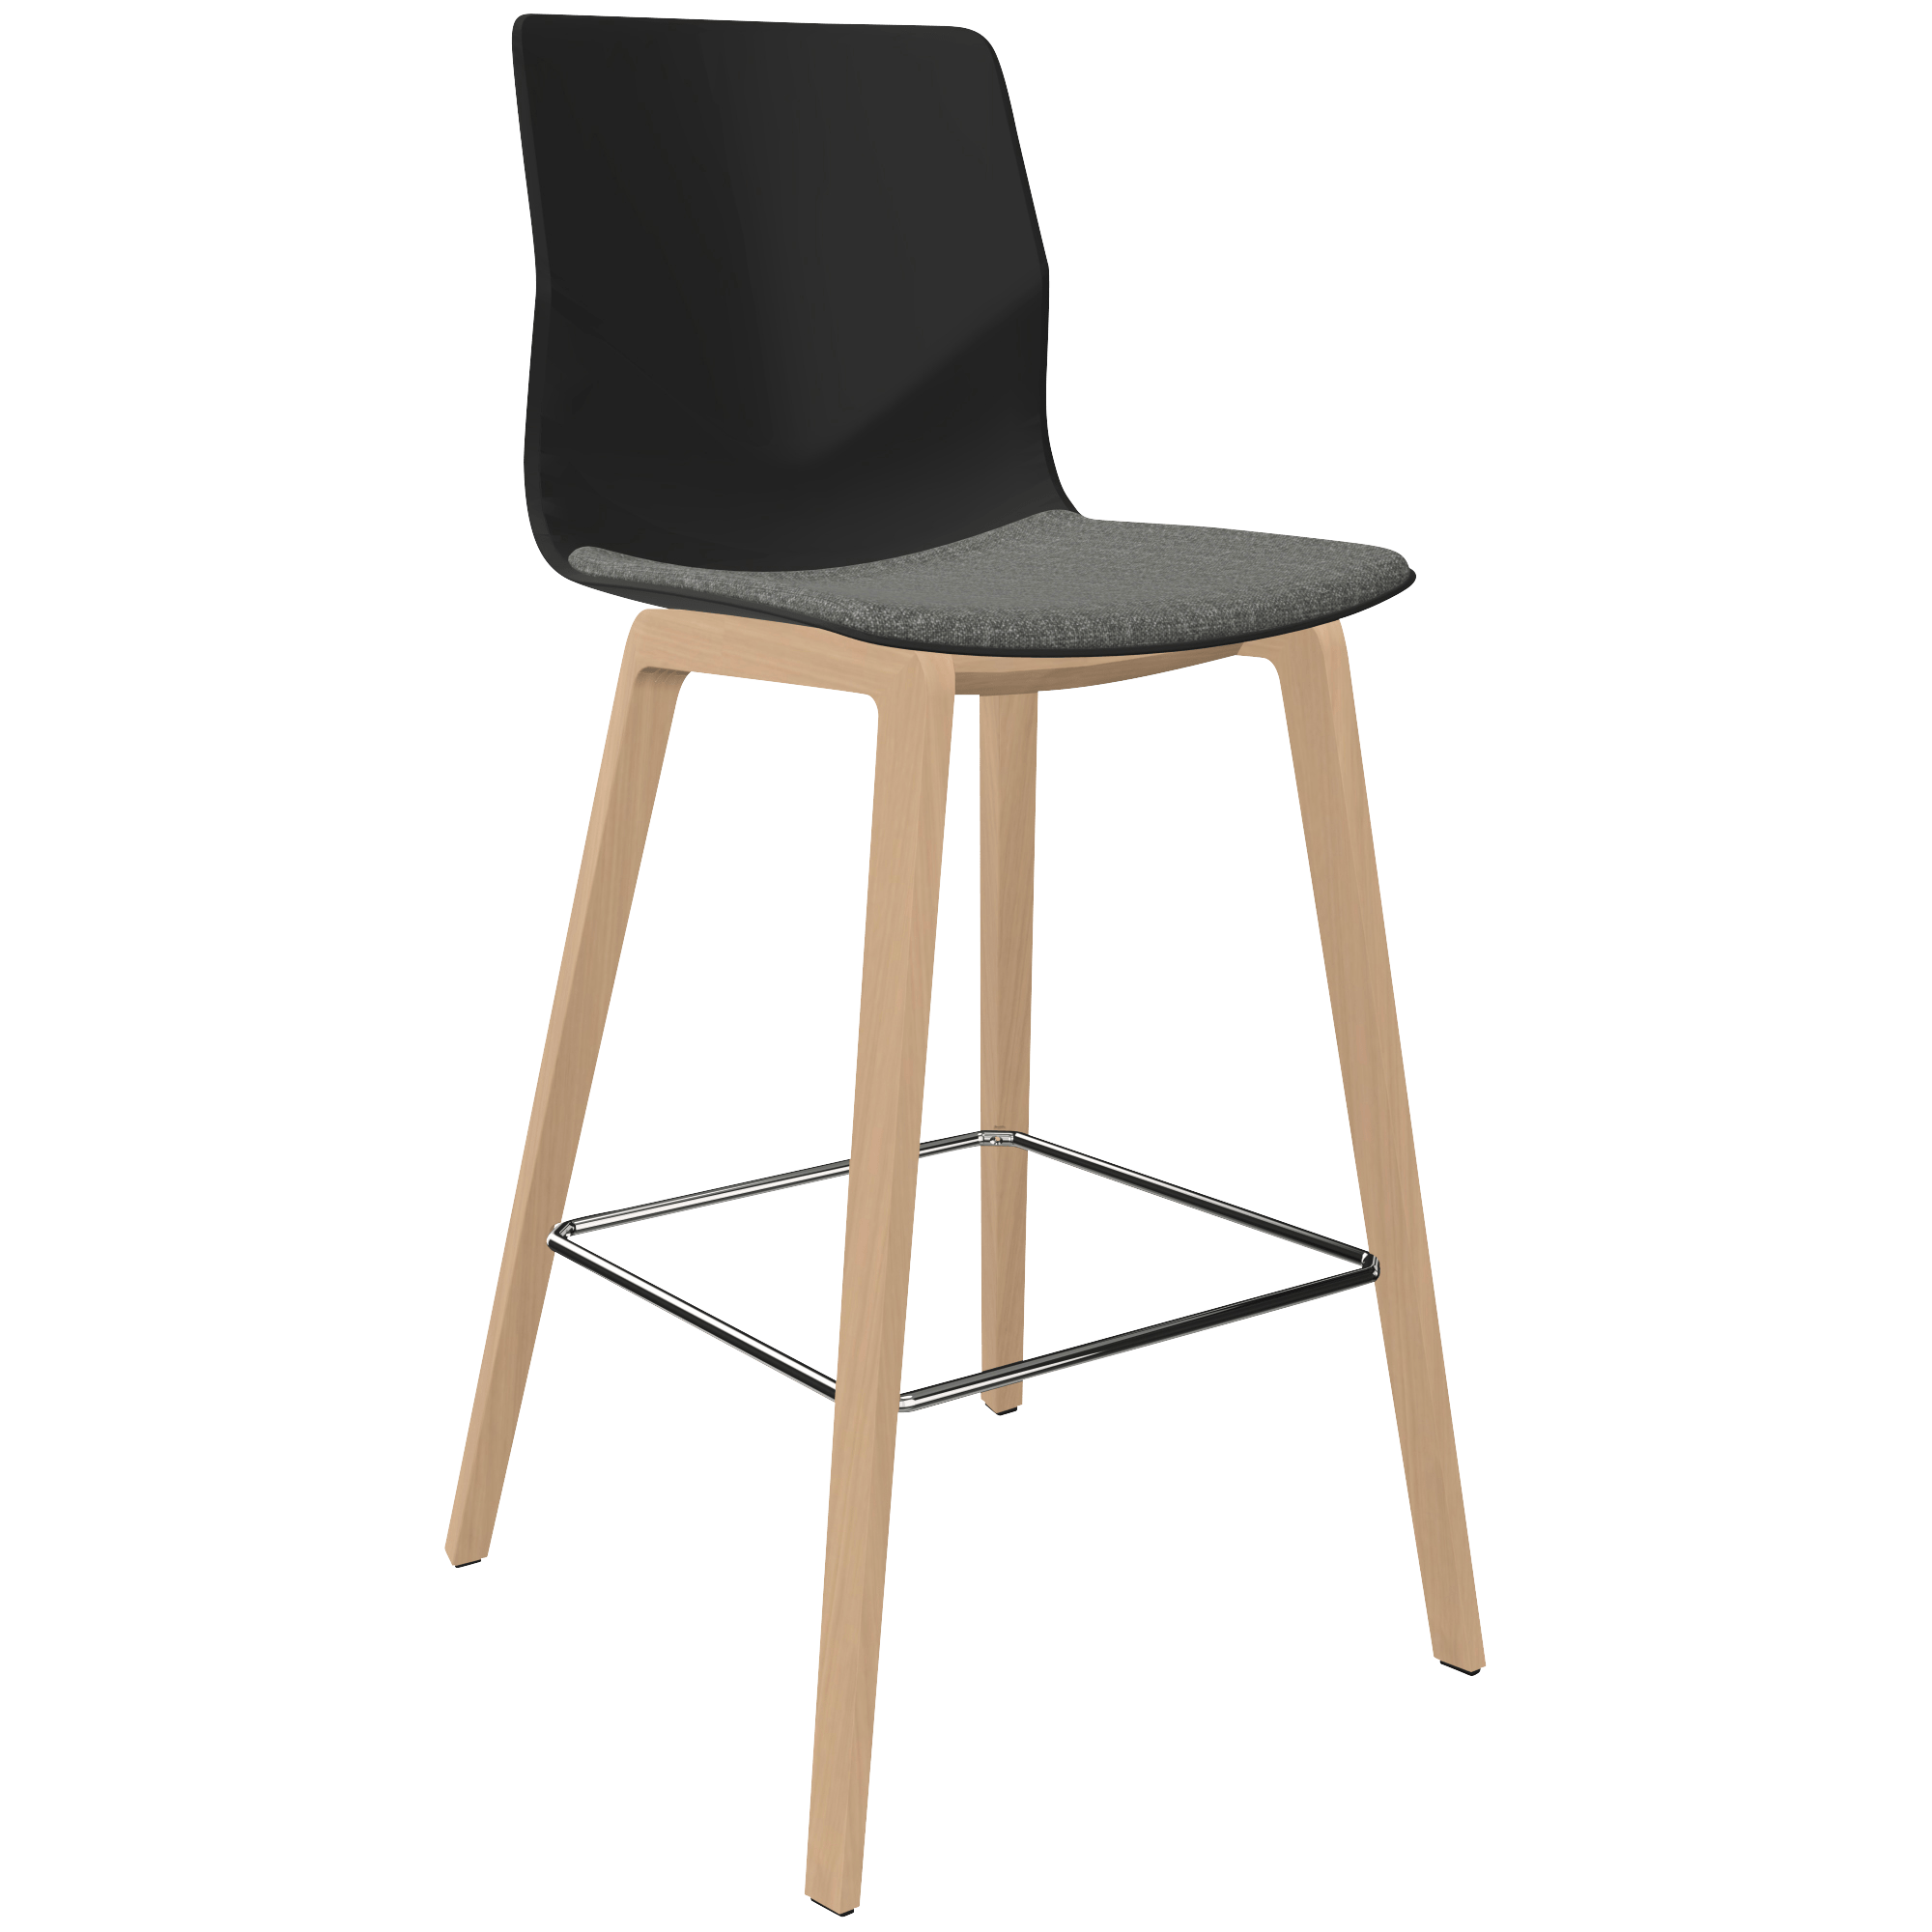 A black counter chair with grey seat with wooden legs.